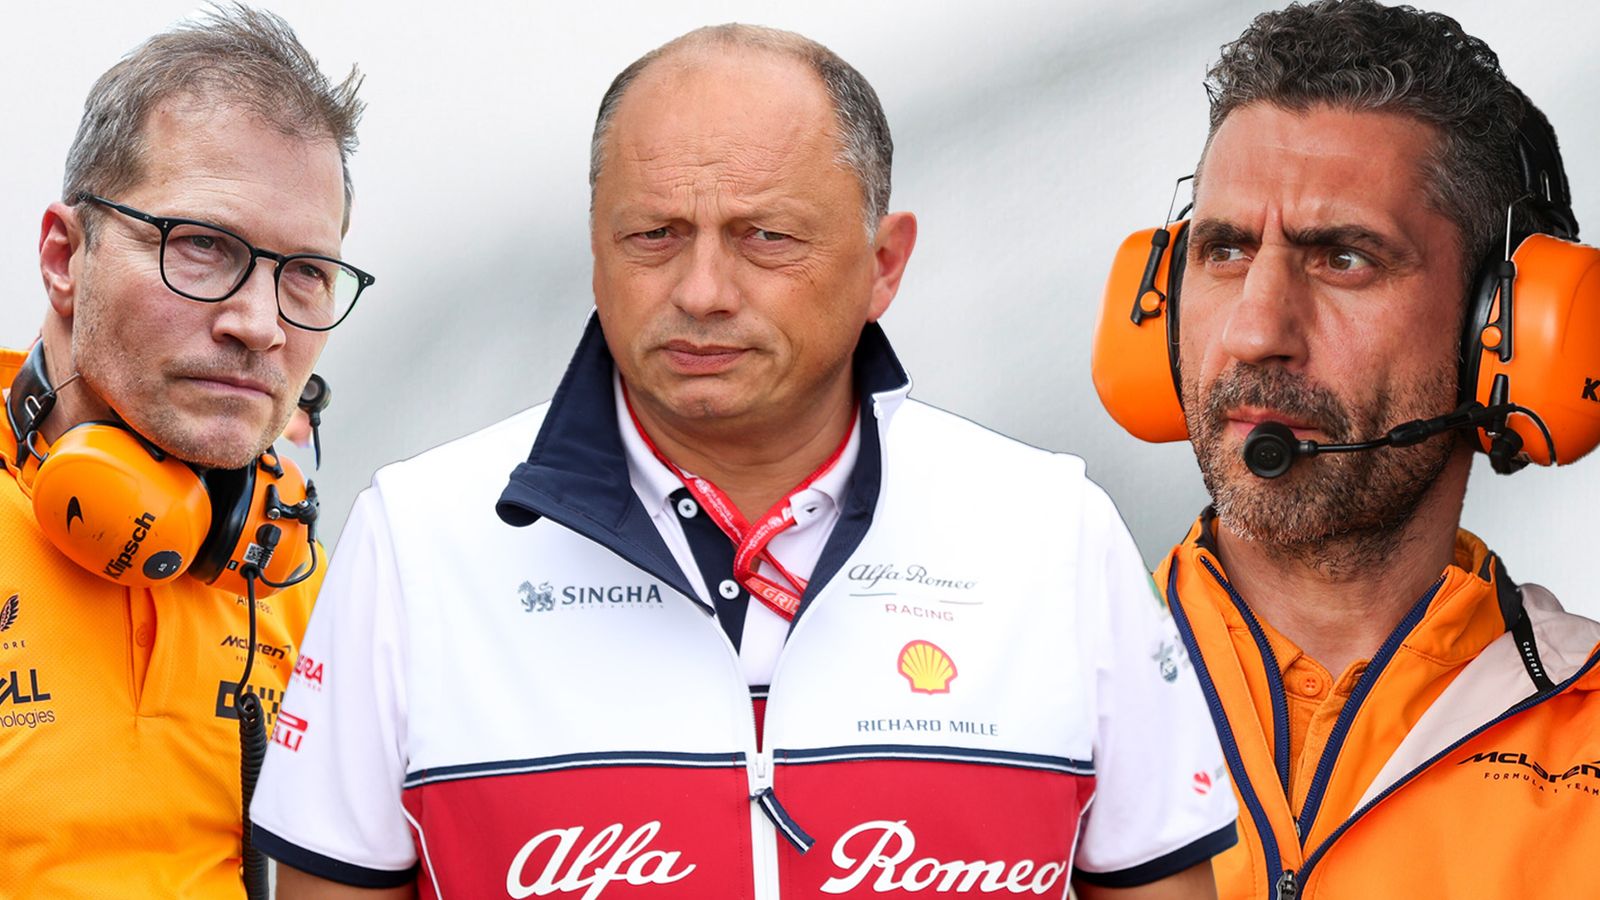 Formula 1 team principal changes analysed after Frederic Vasseur joins Ferrari and Andreas Seidl leaves McLaren